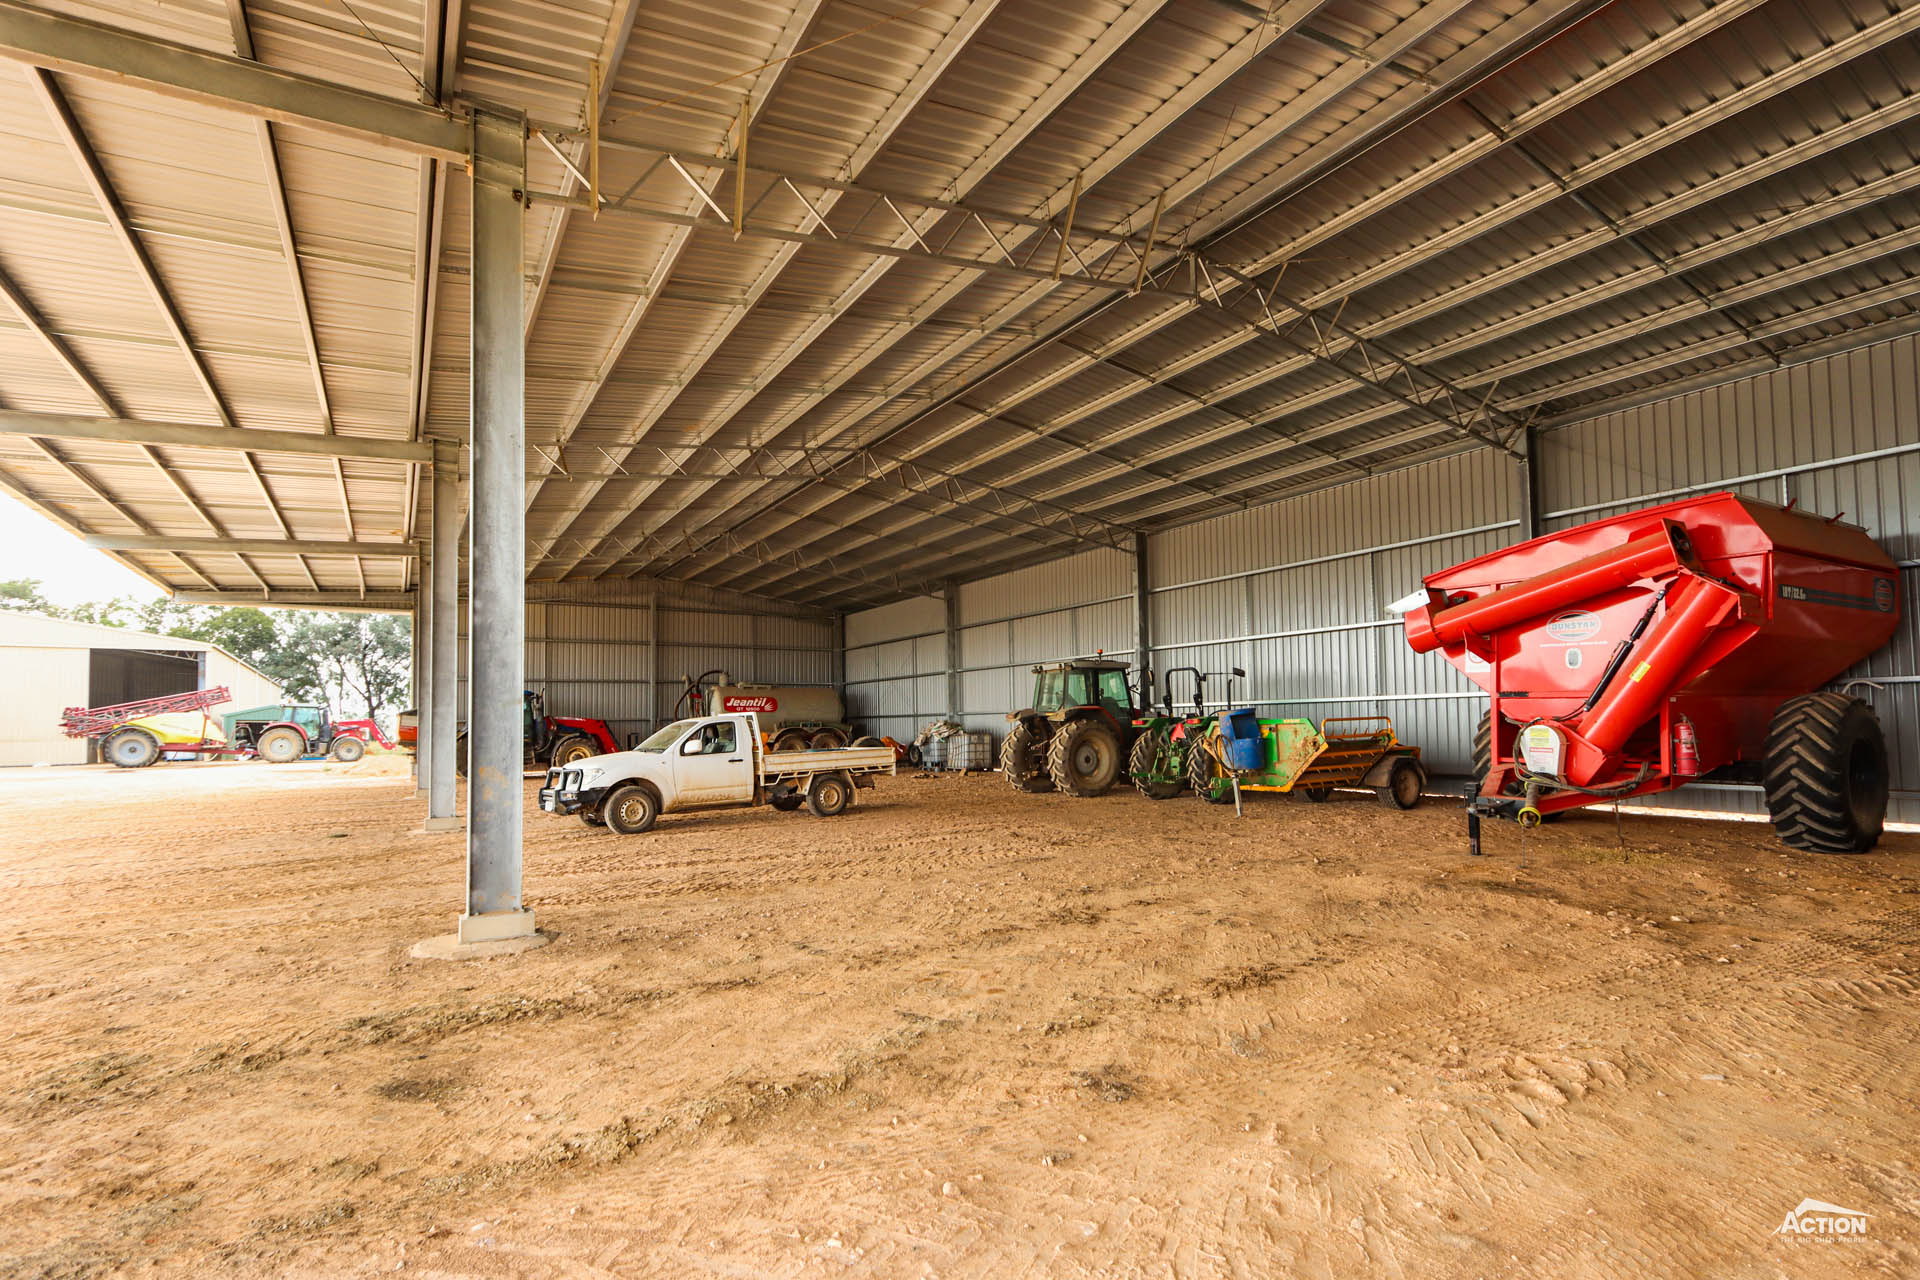 You are currently viewing 36m x 15m x 6m machinery shed with 6m canopy